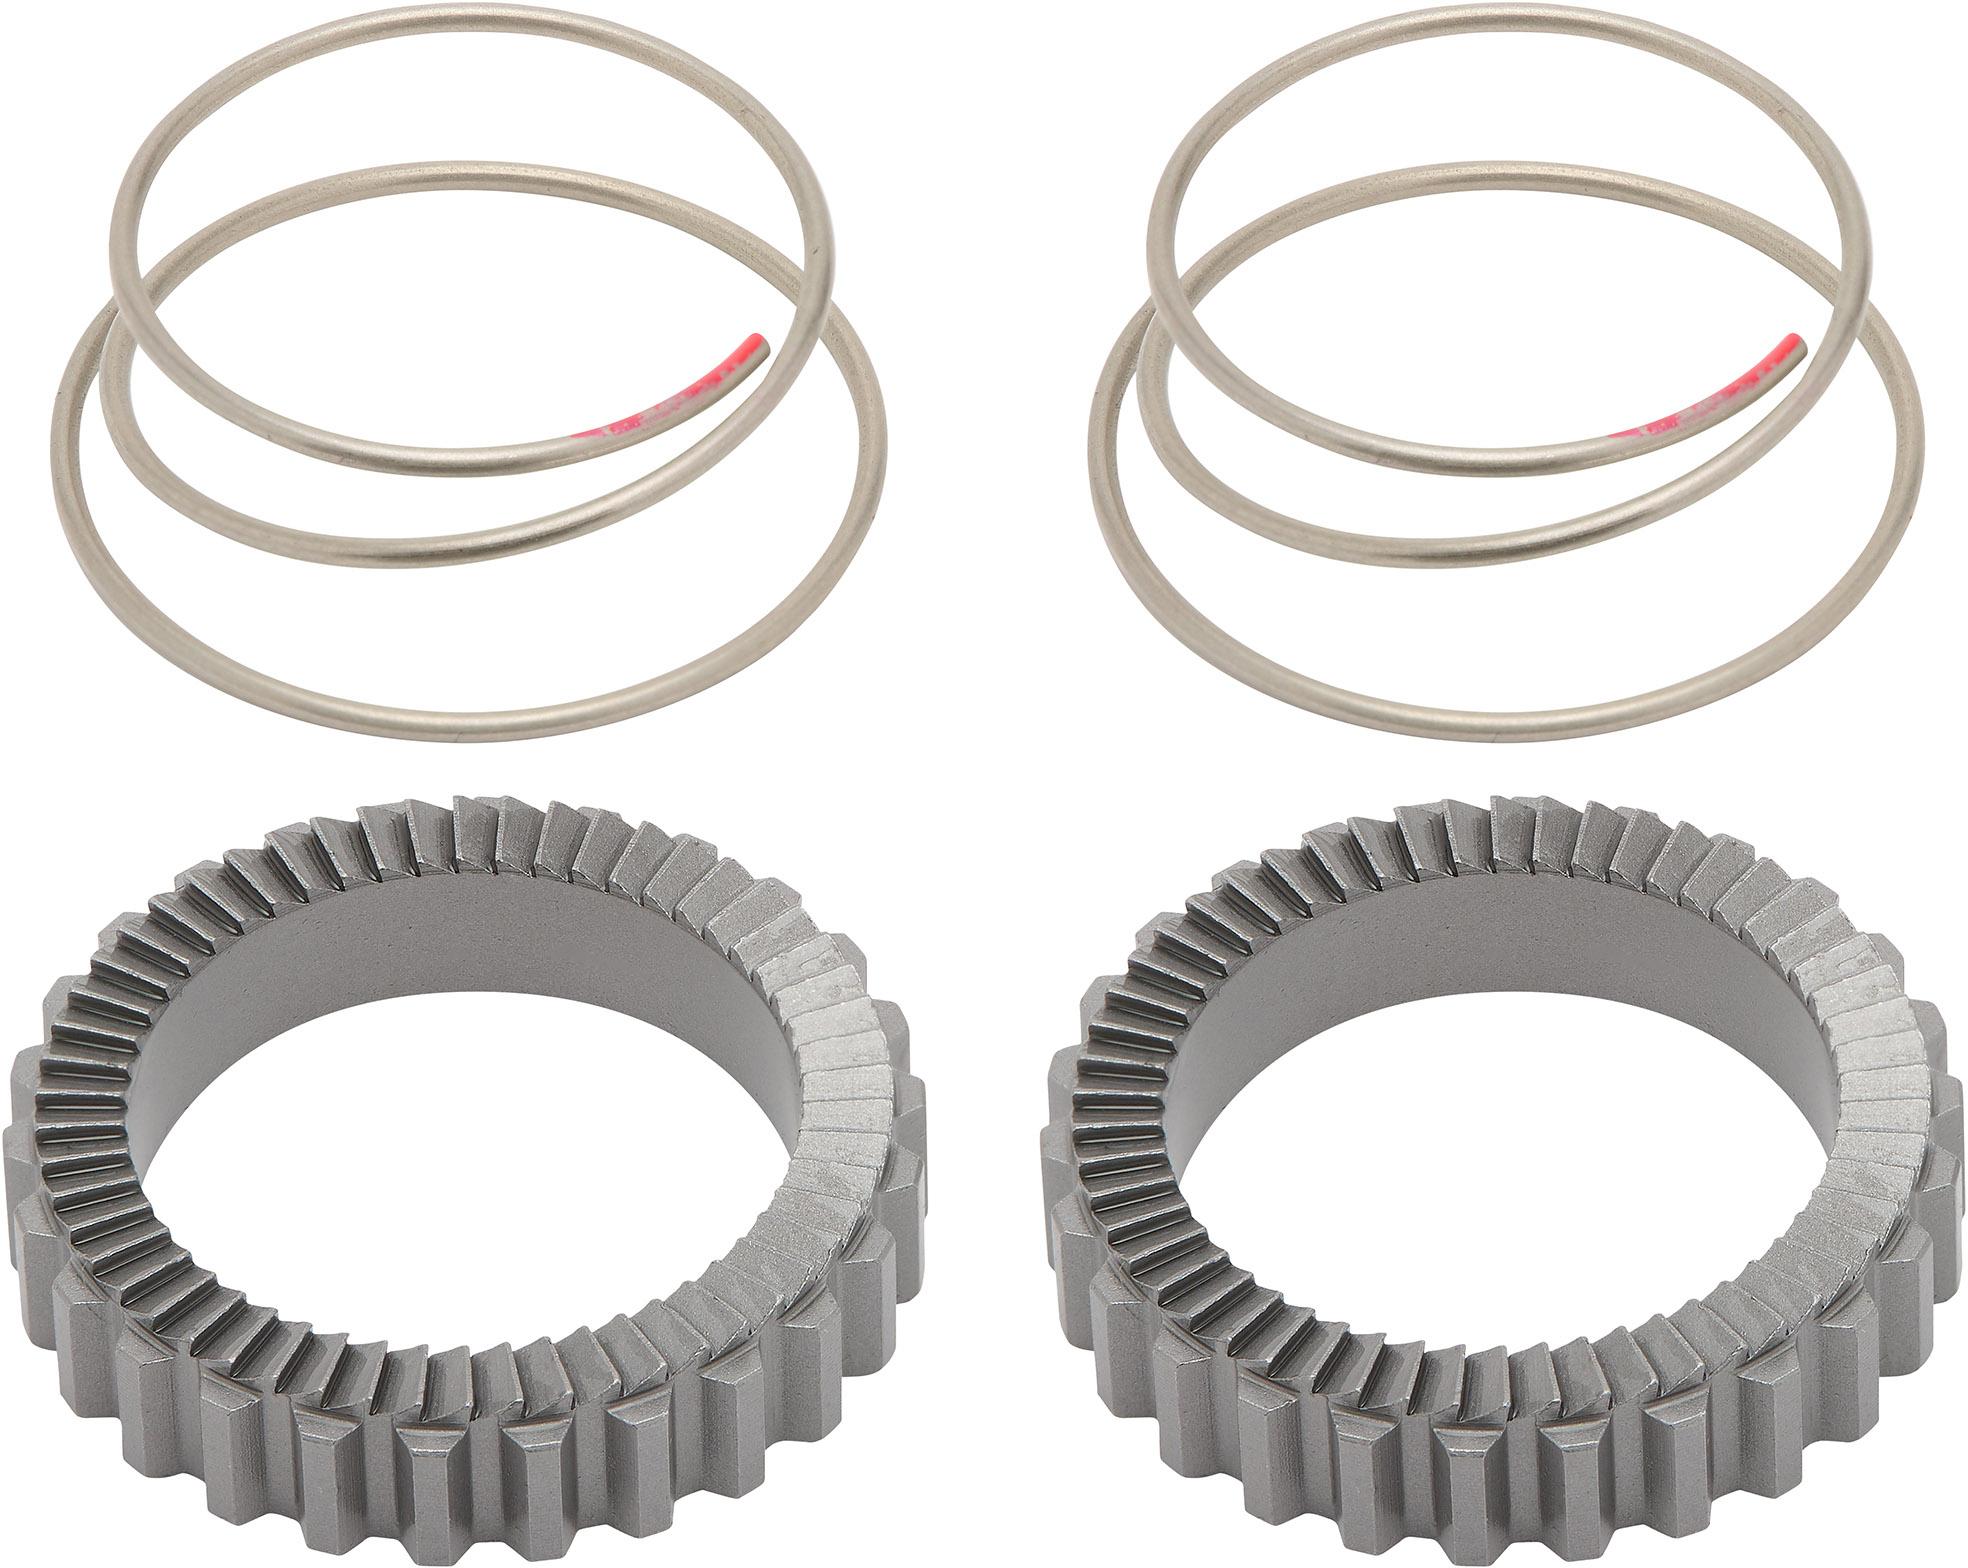 Nukeproof 54t Replacement Ratchet Rings And Springs - Silver